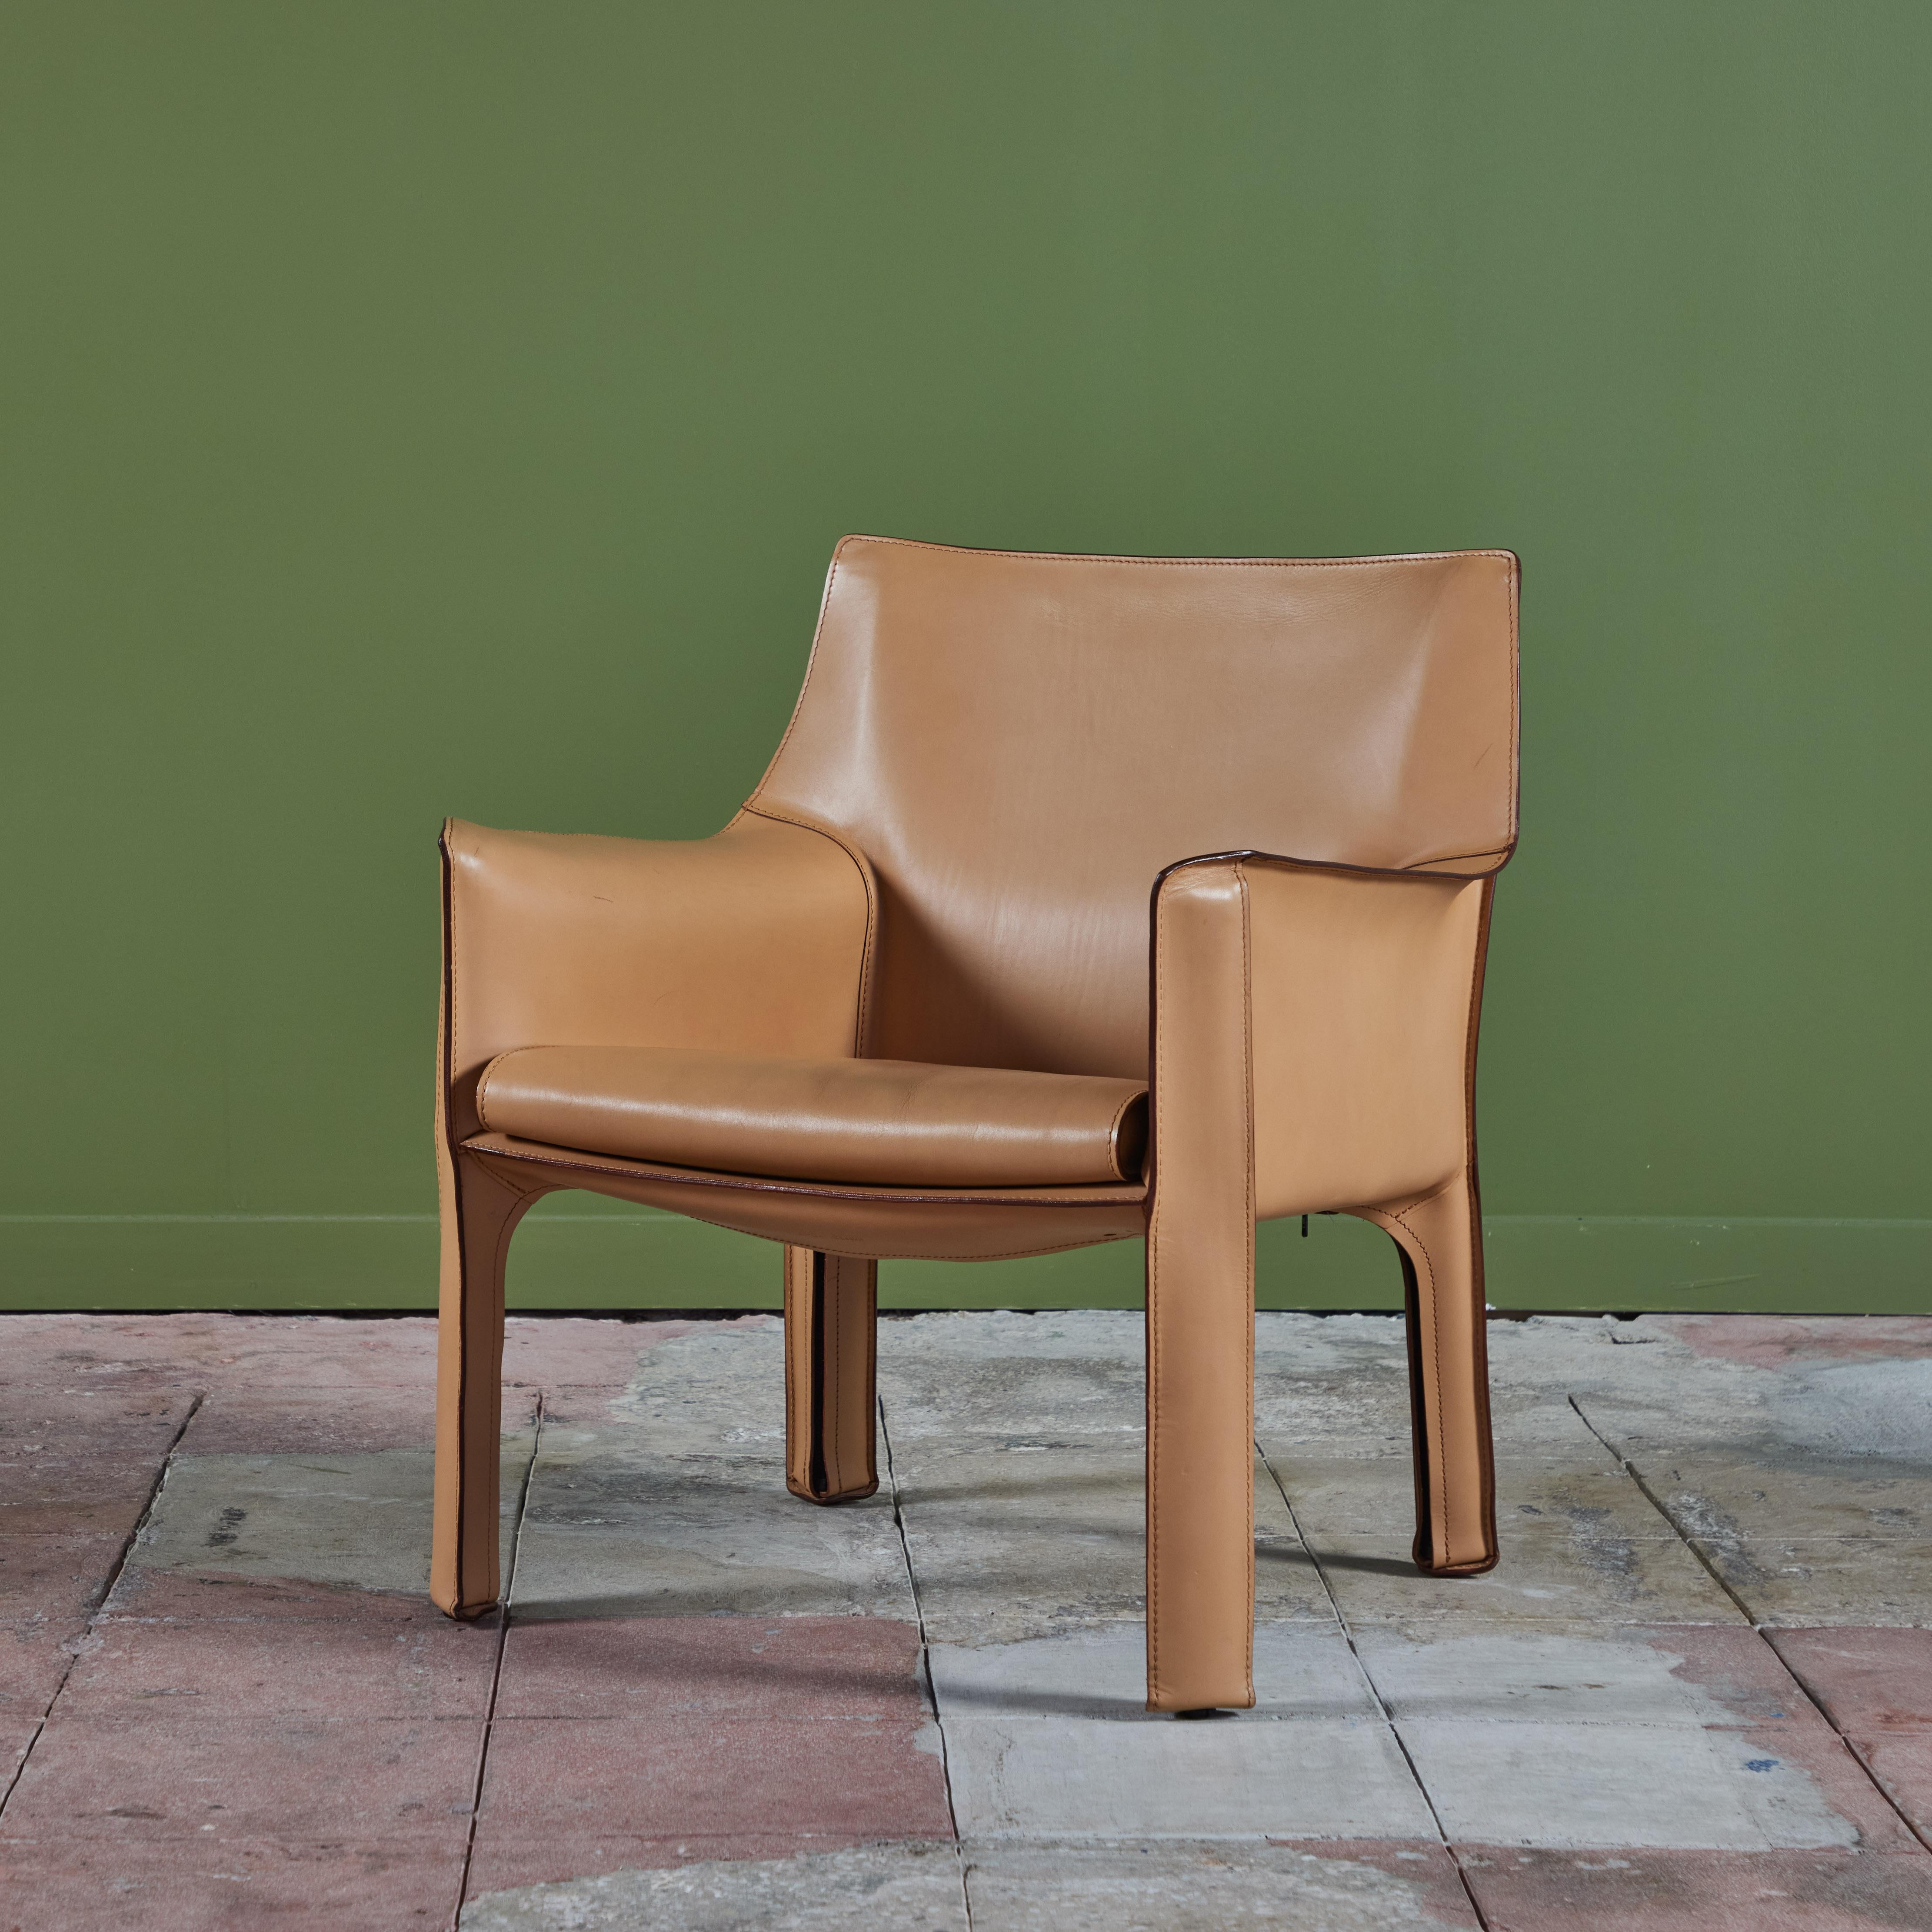 This iconic chair designed by Mario Bellini for Cassina c.1970s, Italy, features the original natural toned saddle leather which is wrapped atop a steel frame. The seat has a rounded leather curved seat cushion with stitched detailing. The legs